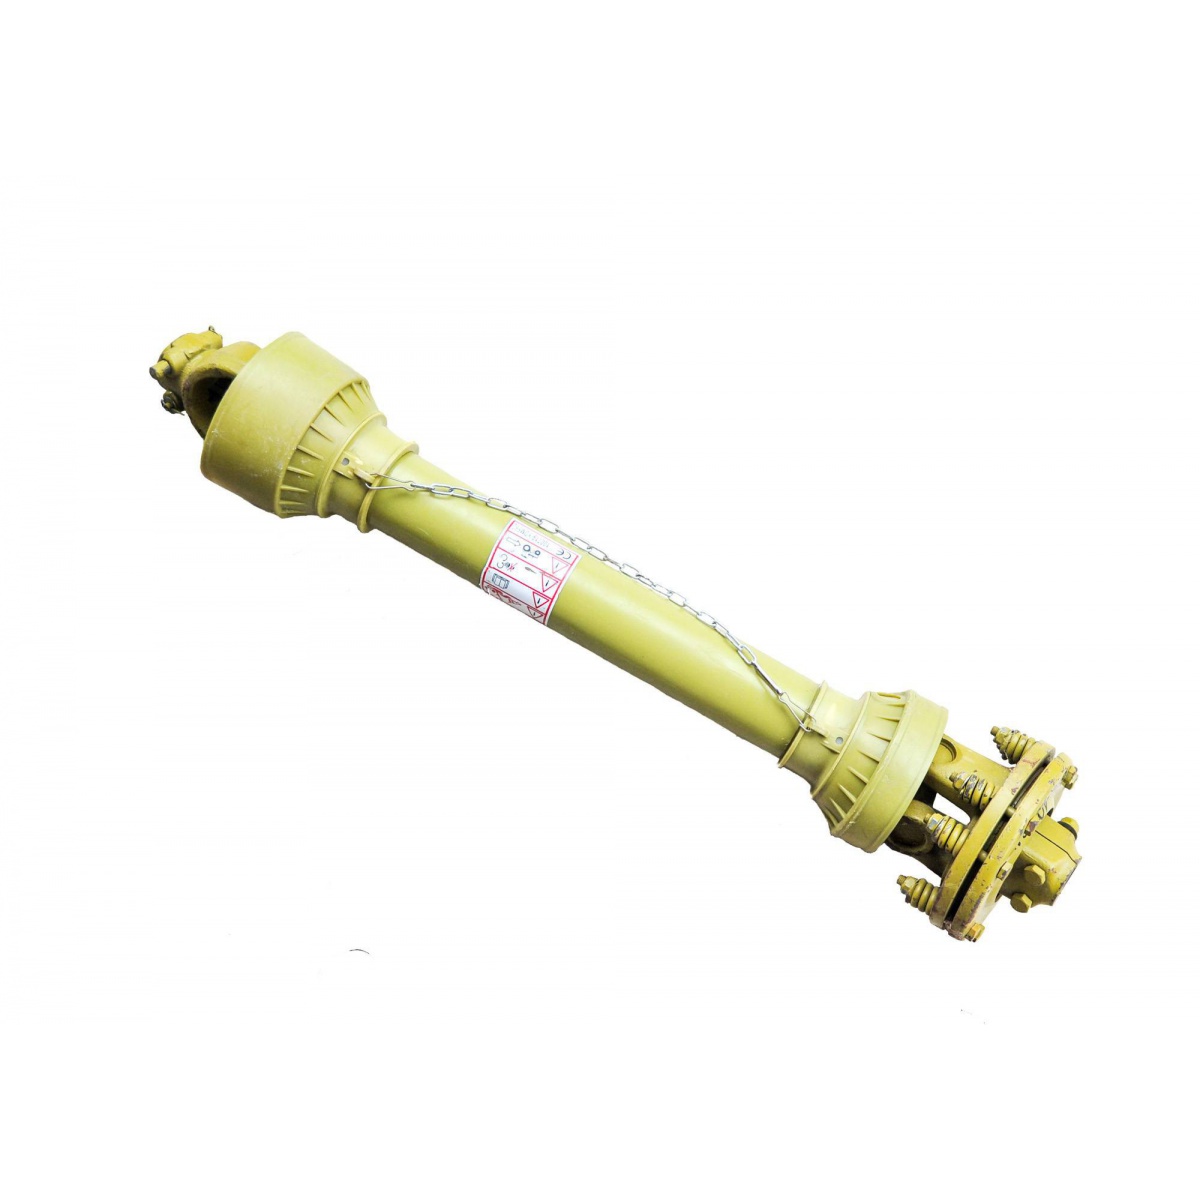 PTO shaft with clutch 07B - 80 cm / up to 105 HP